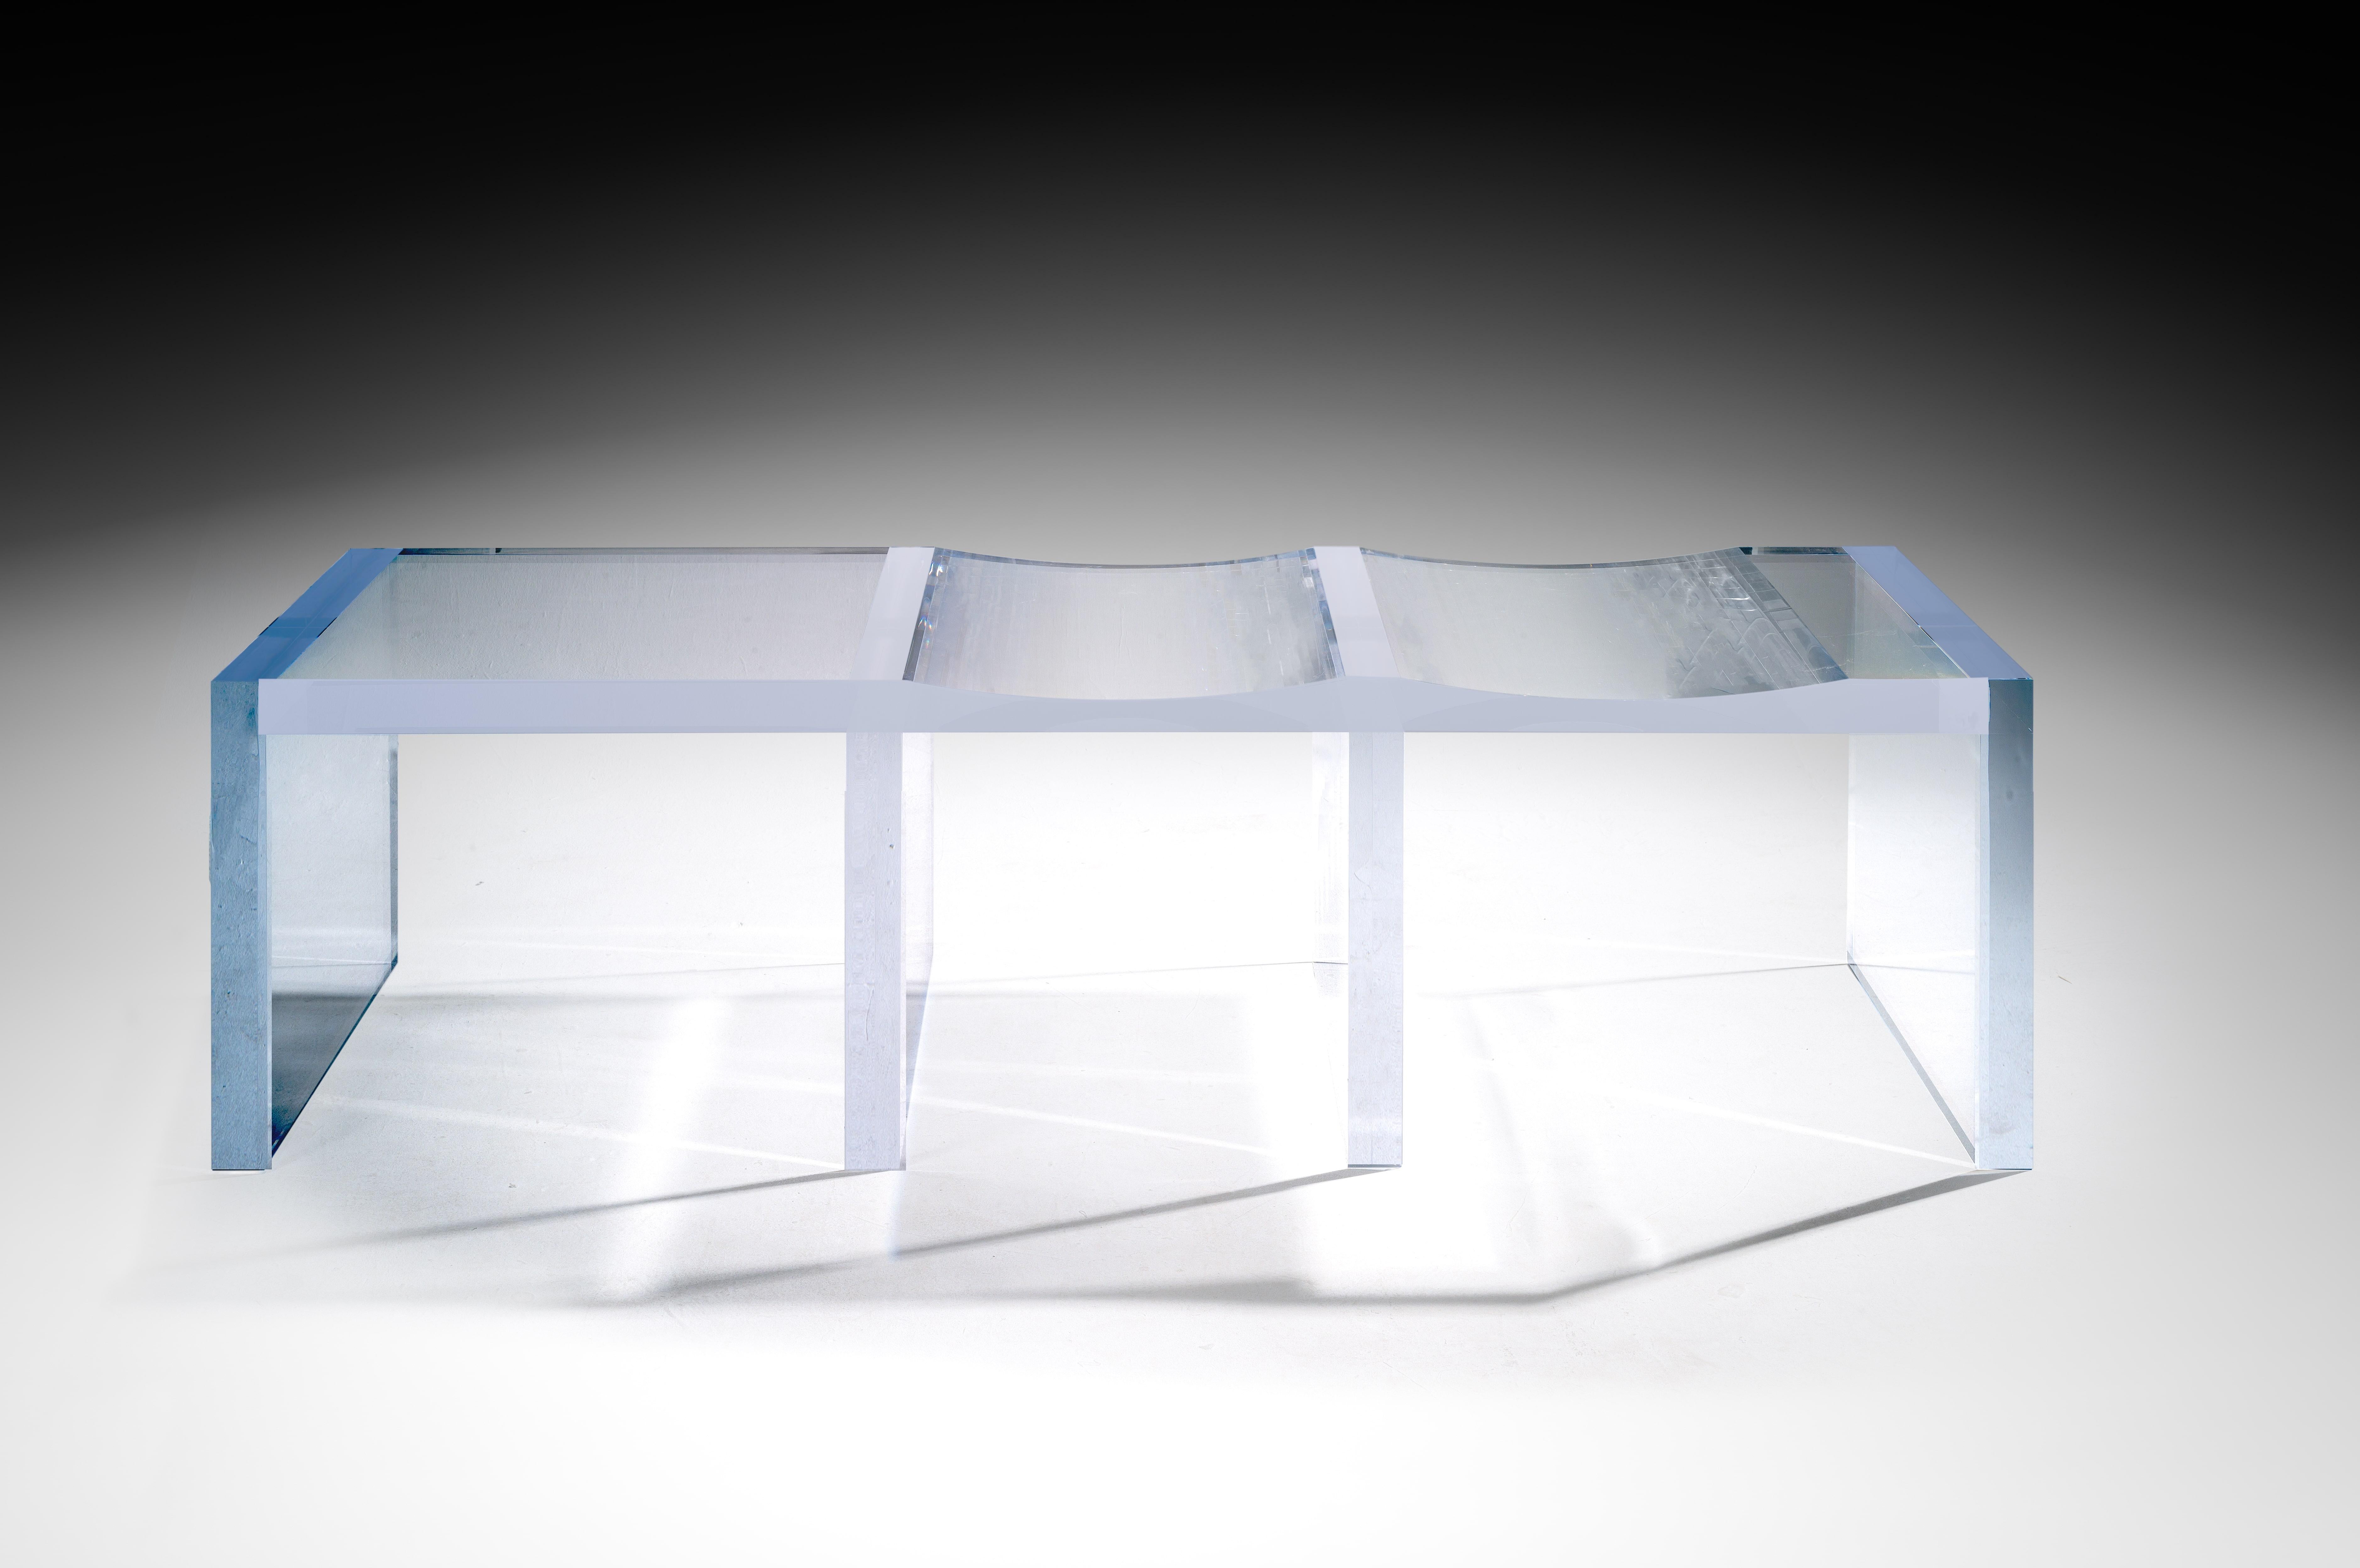 Ghost Altuglas bench by Charly Bounan
Hand-sculpted Altuglas design artwork
Dimensions: 200 x 75 x 56 cm
Material: Plexiglass
Signed Charly Bounan

Charly Bounan, is a Parisian designer renowned for its refined creative style and the important